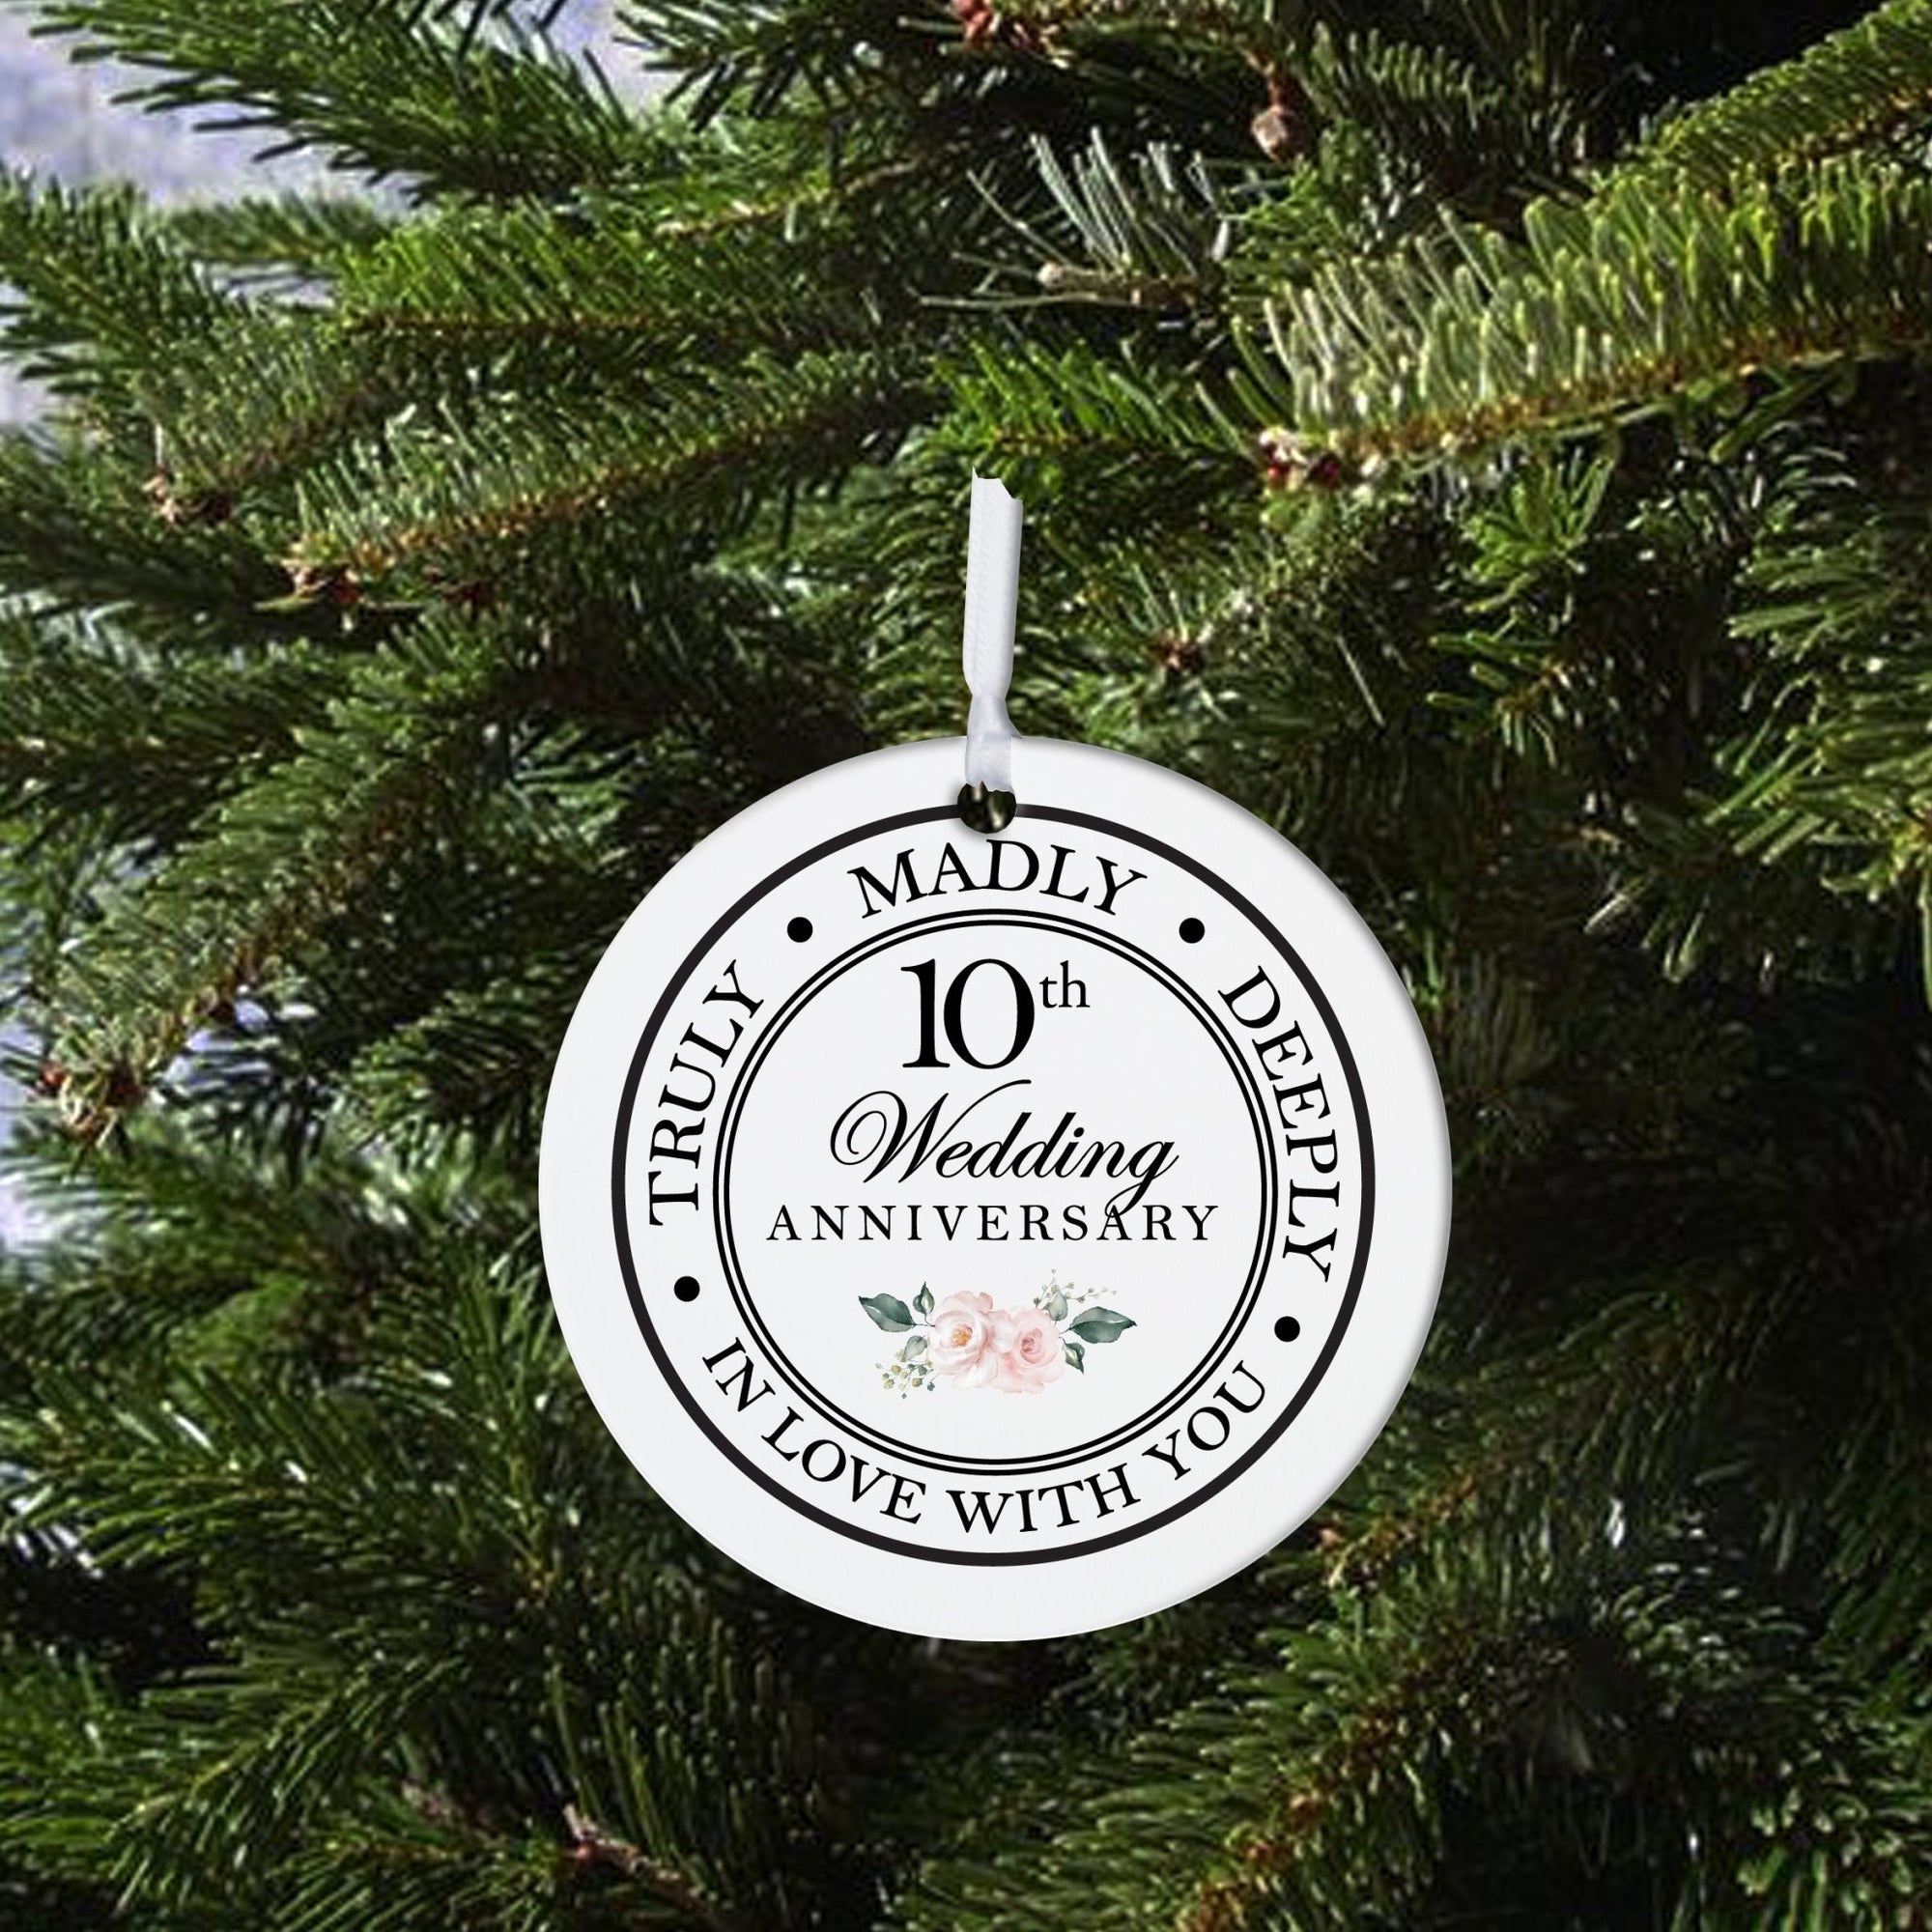 10th Wedding Anniversary White Ornament With Inspirational Message Gift Ideas - Truly, Madly, Deeply In Love With You - LifeSong Milestones